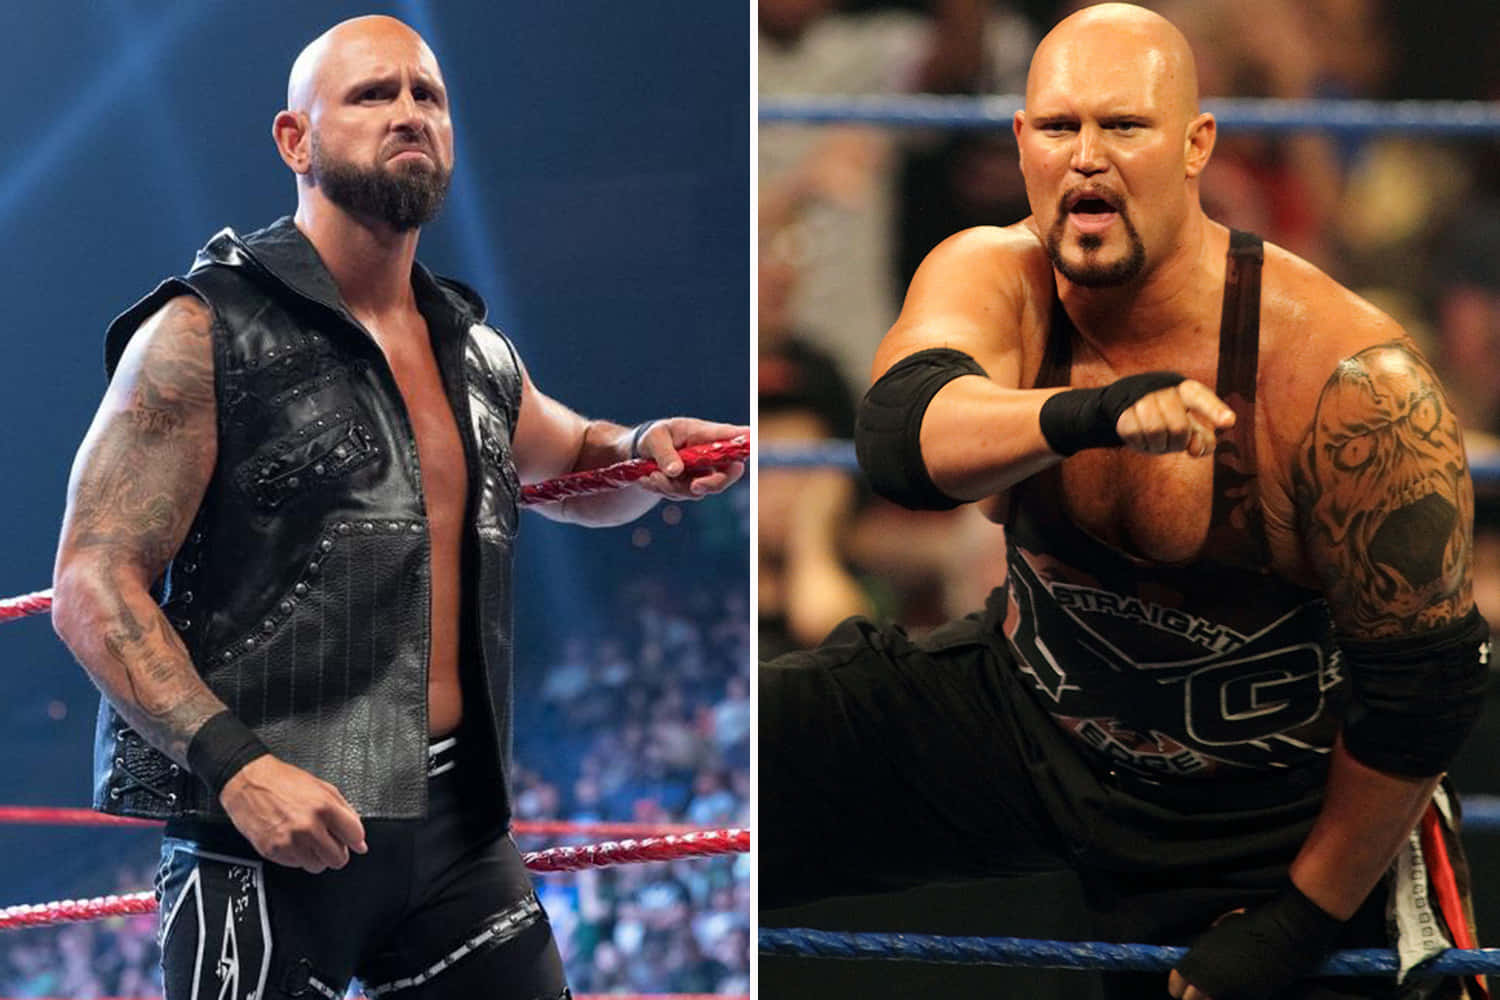 Prominent Wrestlers Karl Anderson&Doc Gallows Wallpaper